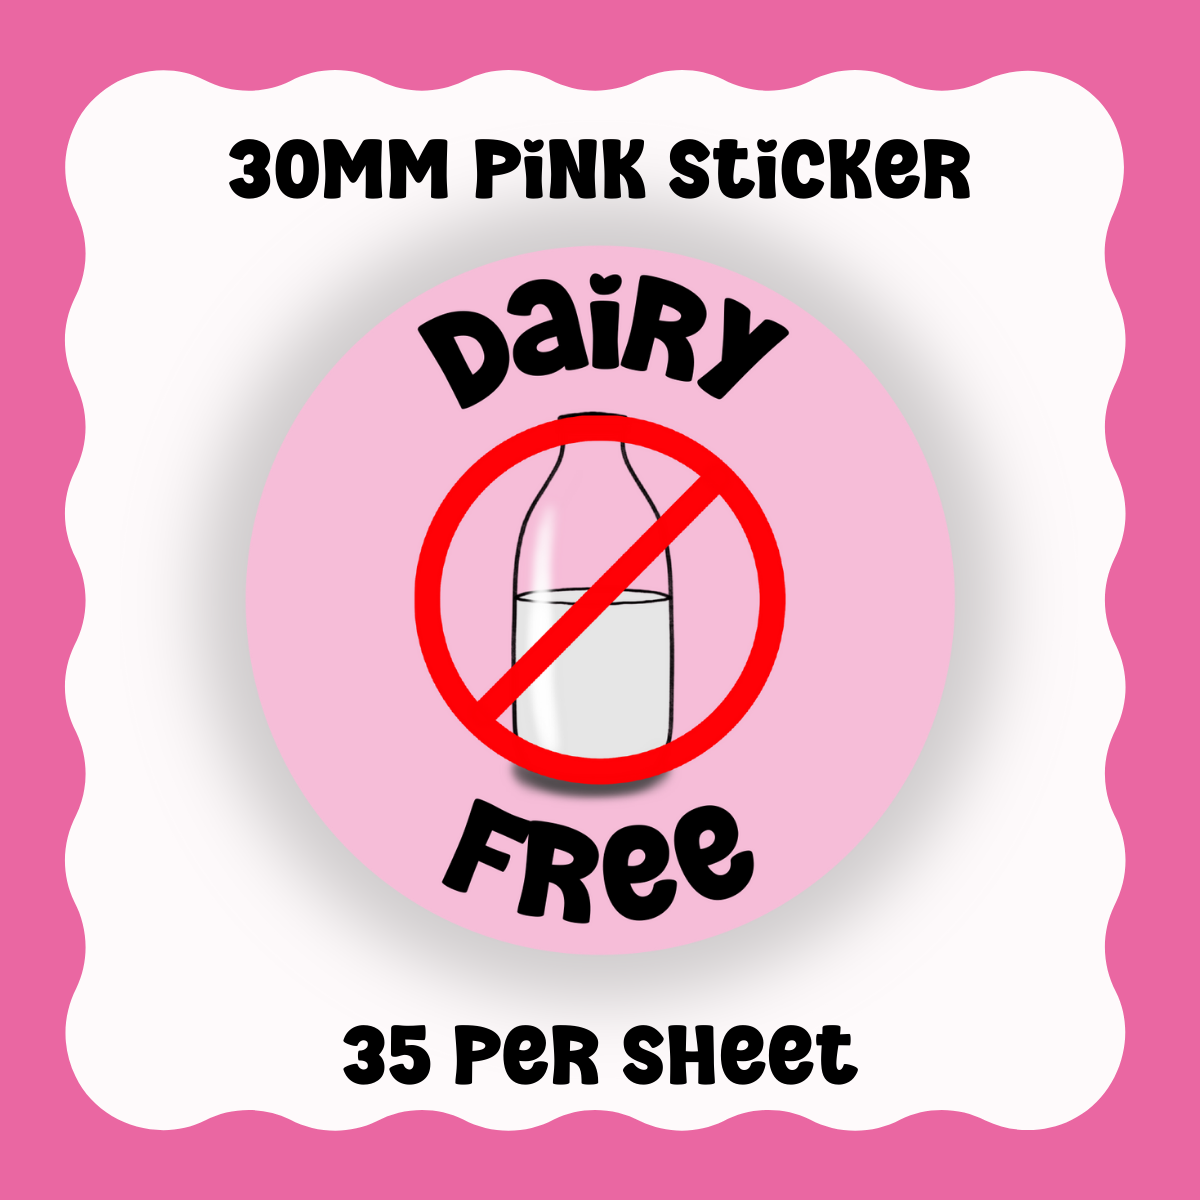 Dairy Free Stickers - With Graphic